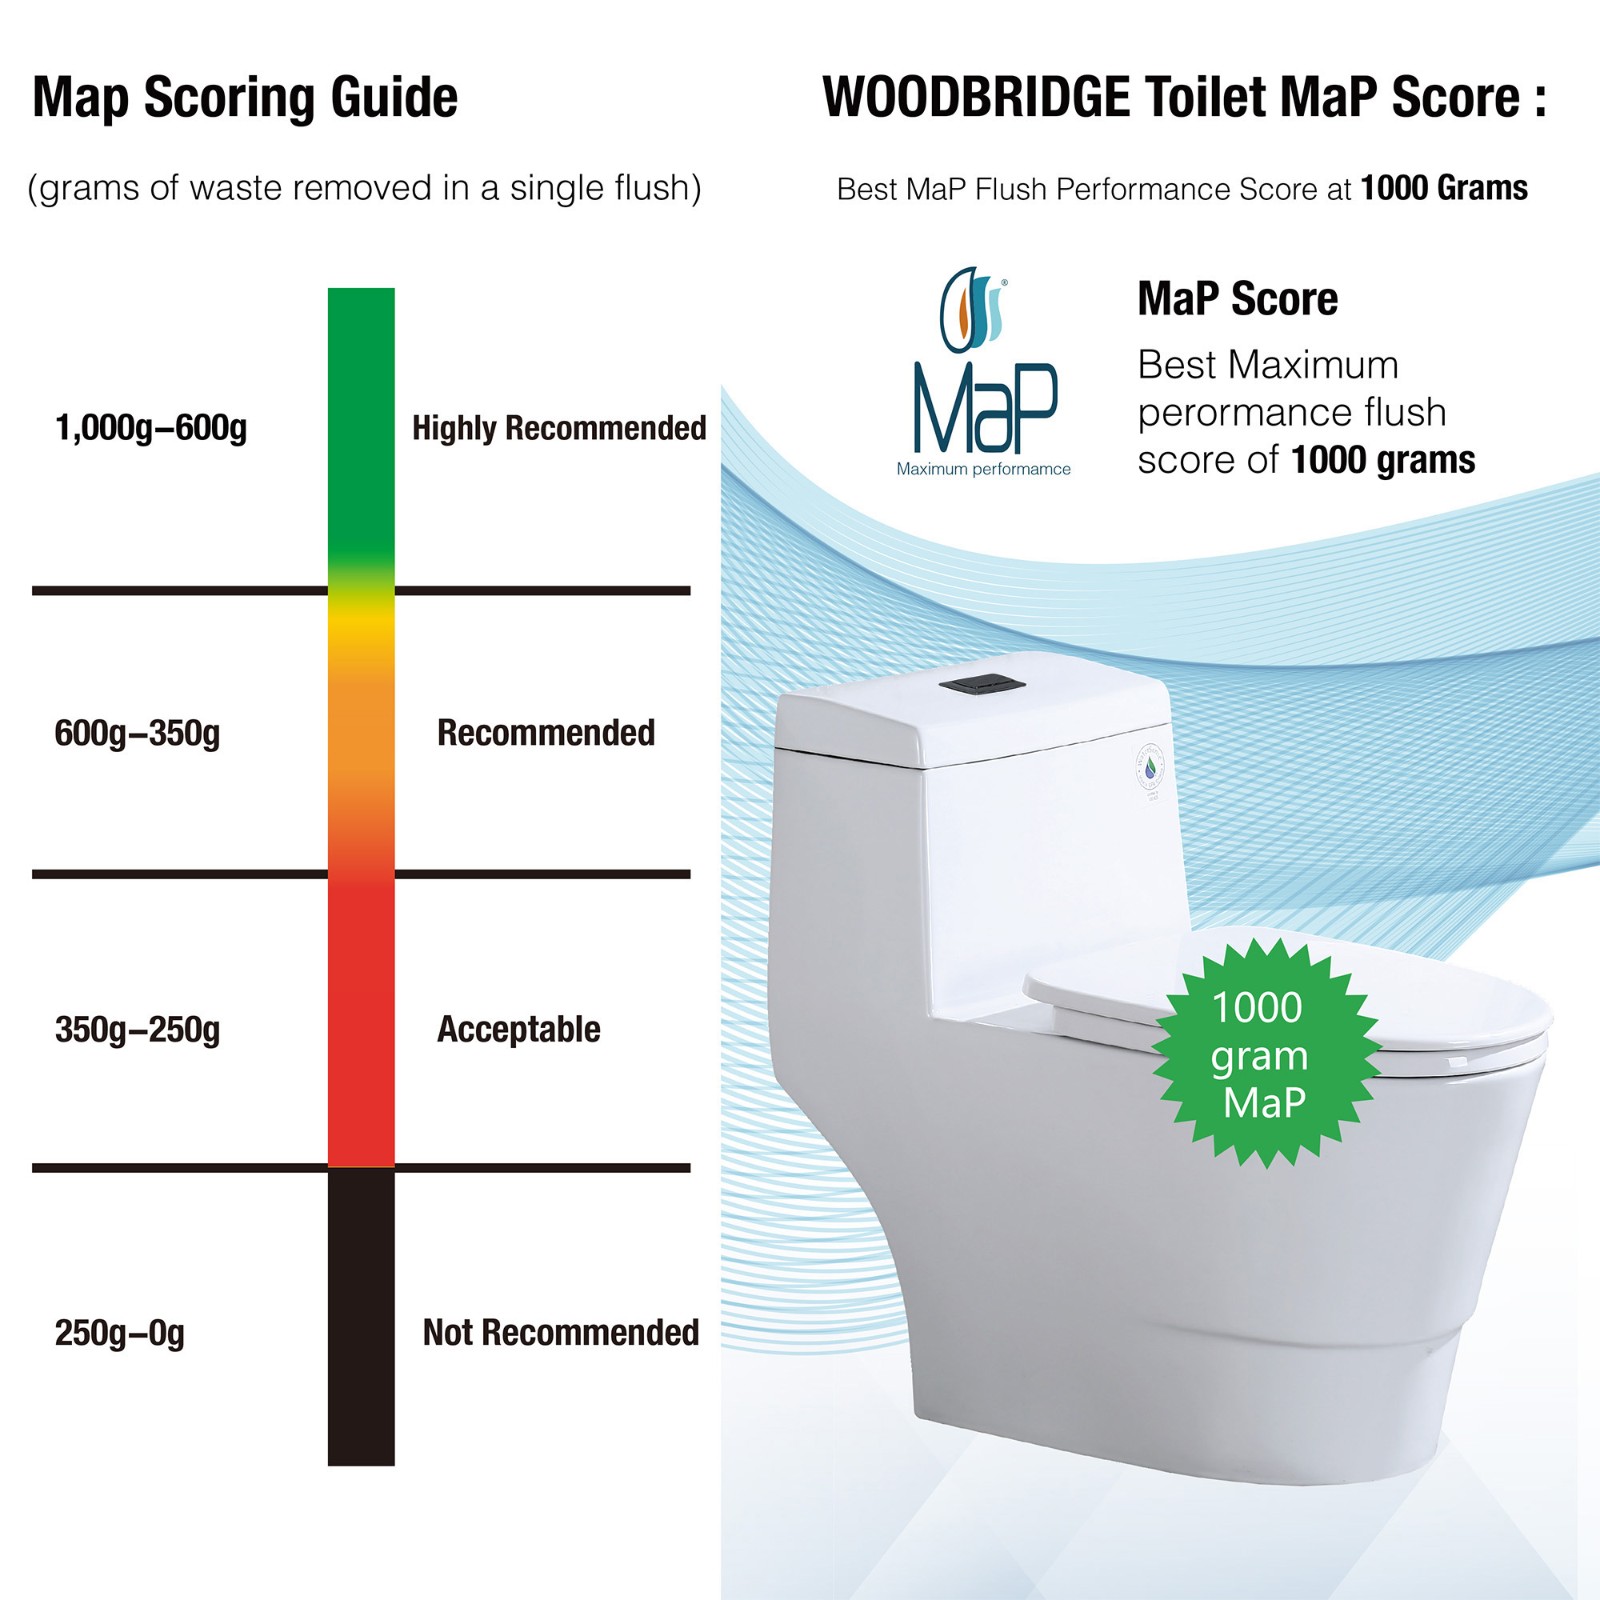  WOODBRIDGEE One Piece Toilet with Soft Closing Seat, Chair Height, 1.28 GPF Dual, Water Sensed, 1000 Gram MaP Flushing Score Toilet with Oil Rubbed Bronze Button T0001-ORB, White_5696